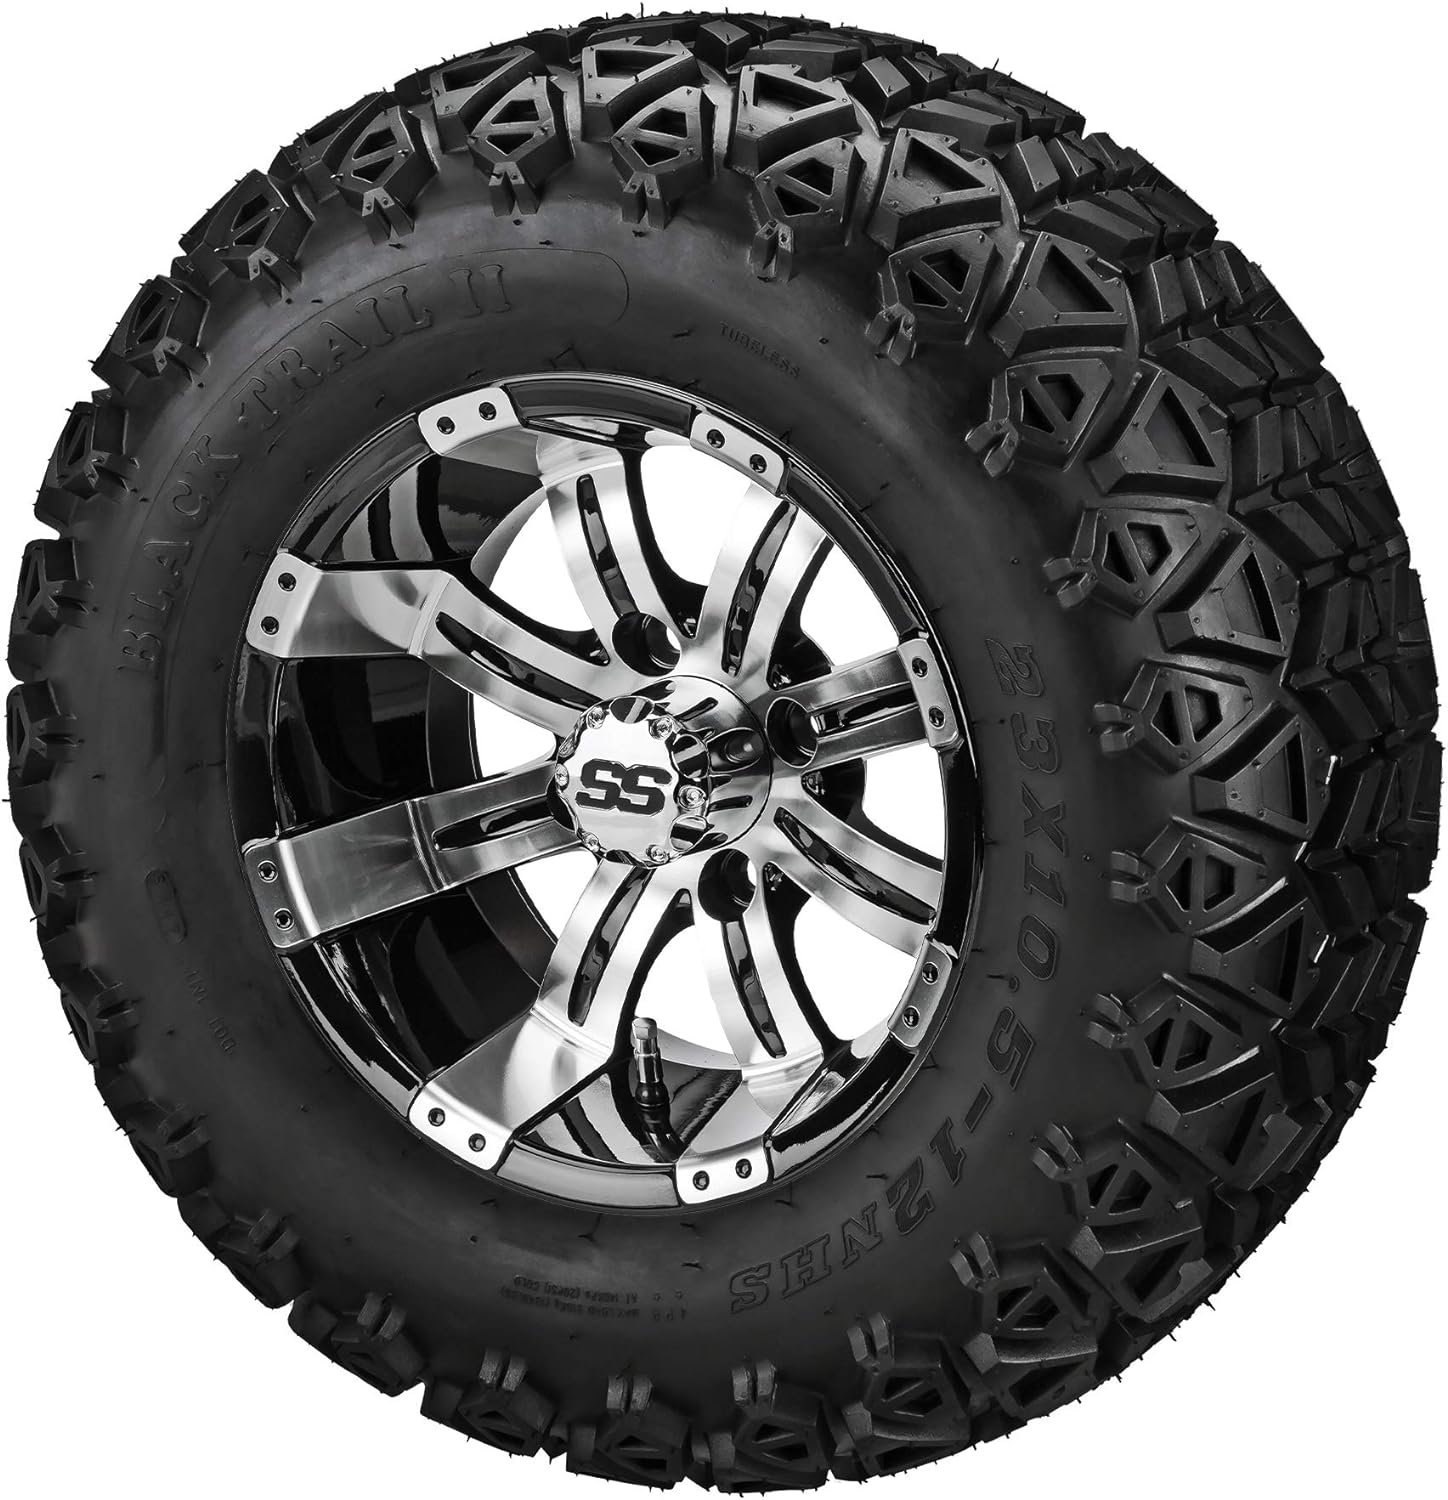 RM Cart - 12 Casino Black/Machined on 23x10.50-12 Black Trail II Tires (Set of 4), Fits Yamaha carts, Golf Cart Tires and Wheels Combo, Can be Used on Lawn Mowers and ATVs